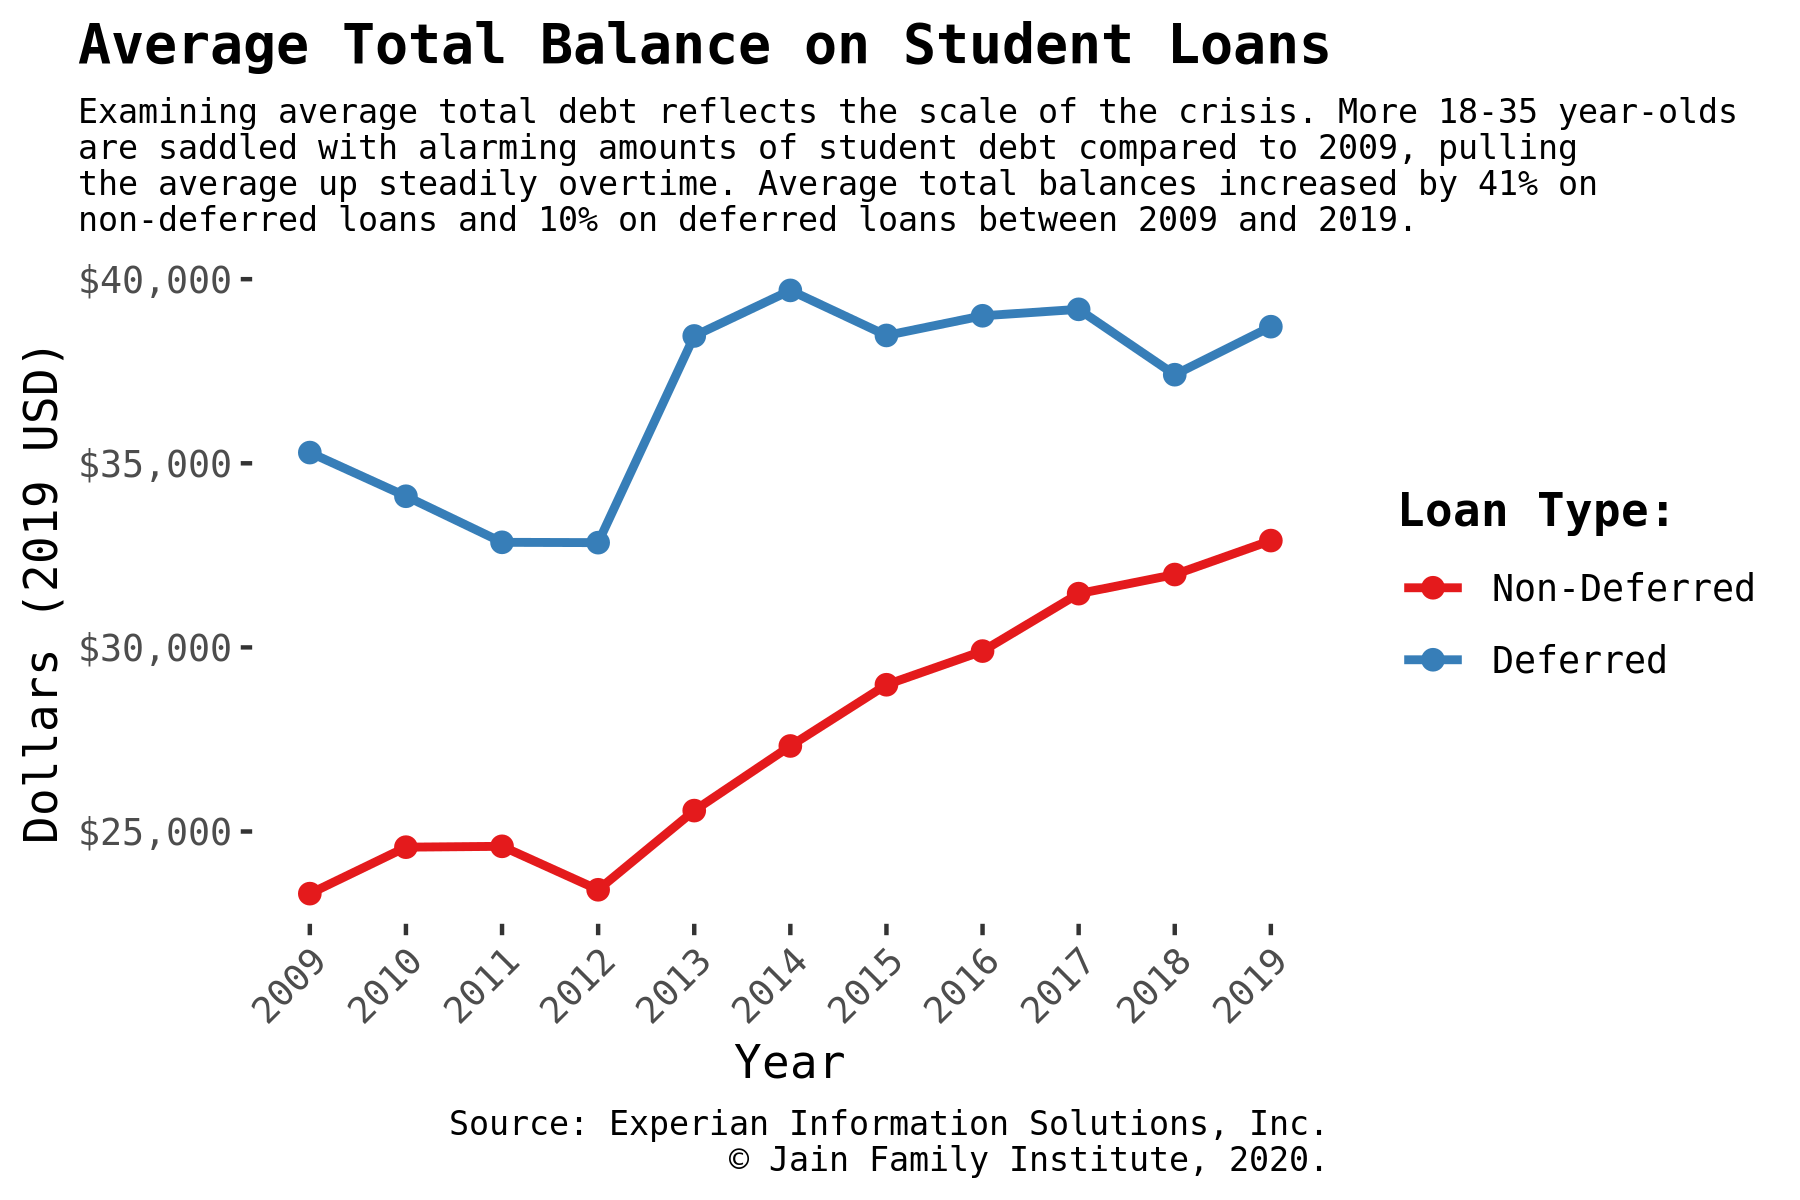 Examining average total debt reflects the scale of the crisis. More 18-35 year-olds are saddled with alarming amounts of student debt compared to 2009, pulling the average up steadily overtime. Average total balances increased by 41% on non-deferred loans and 10% on deferred loans between 2009 and 2019.